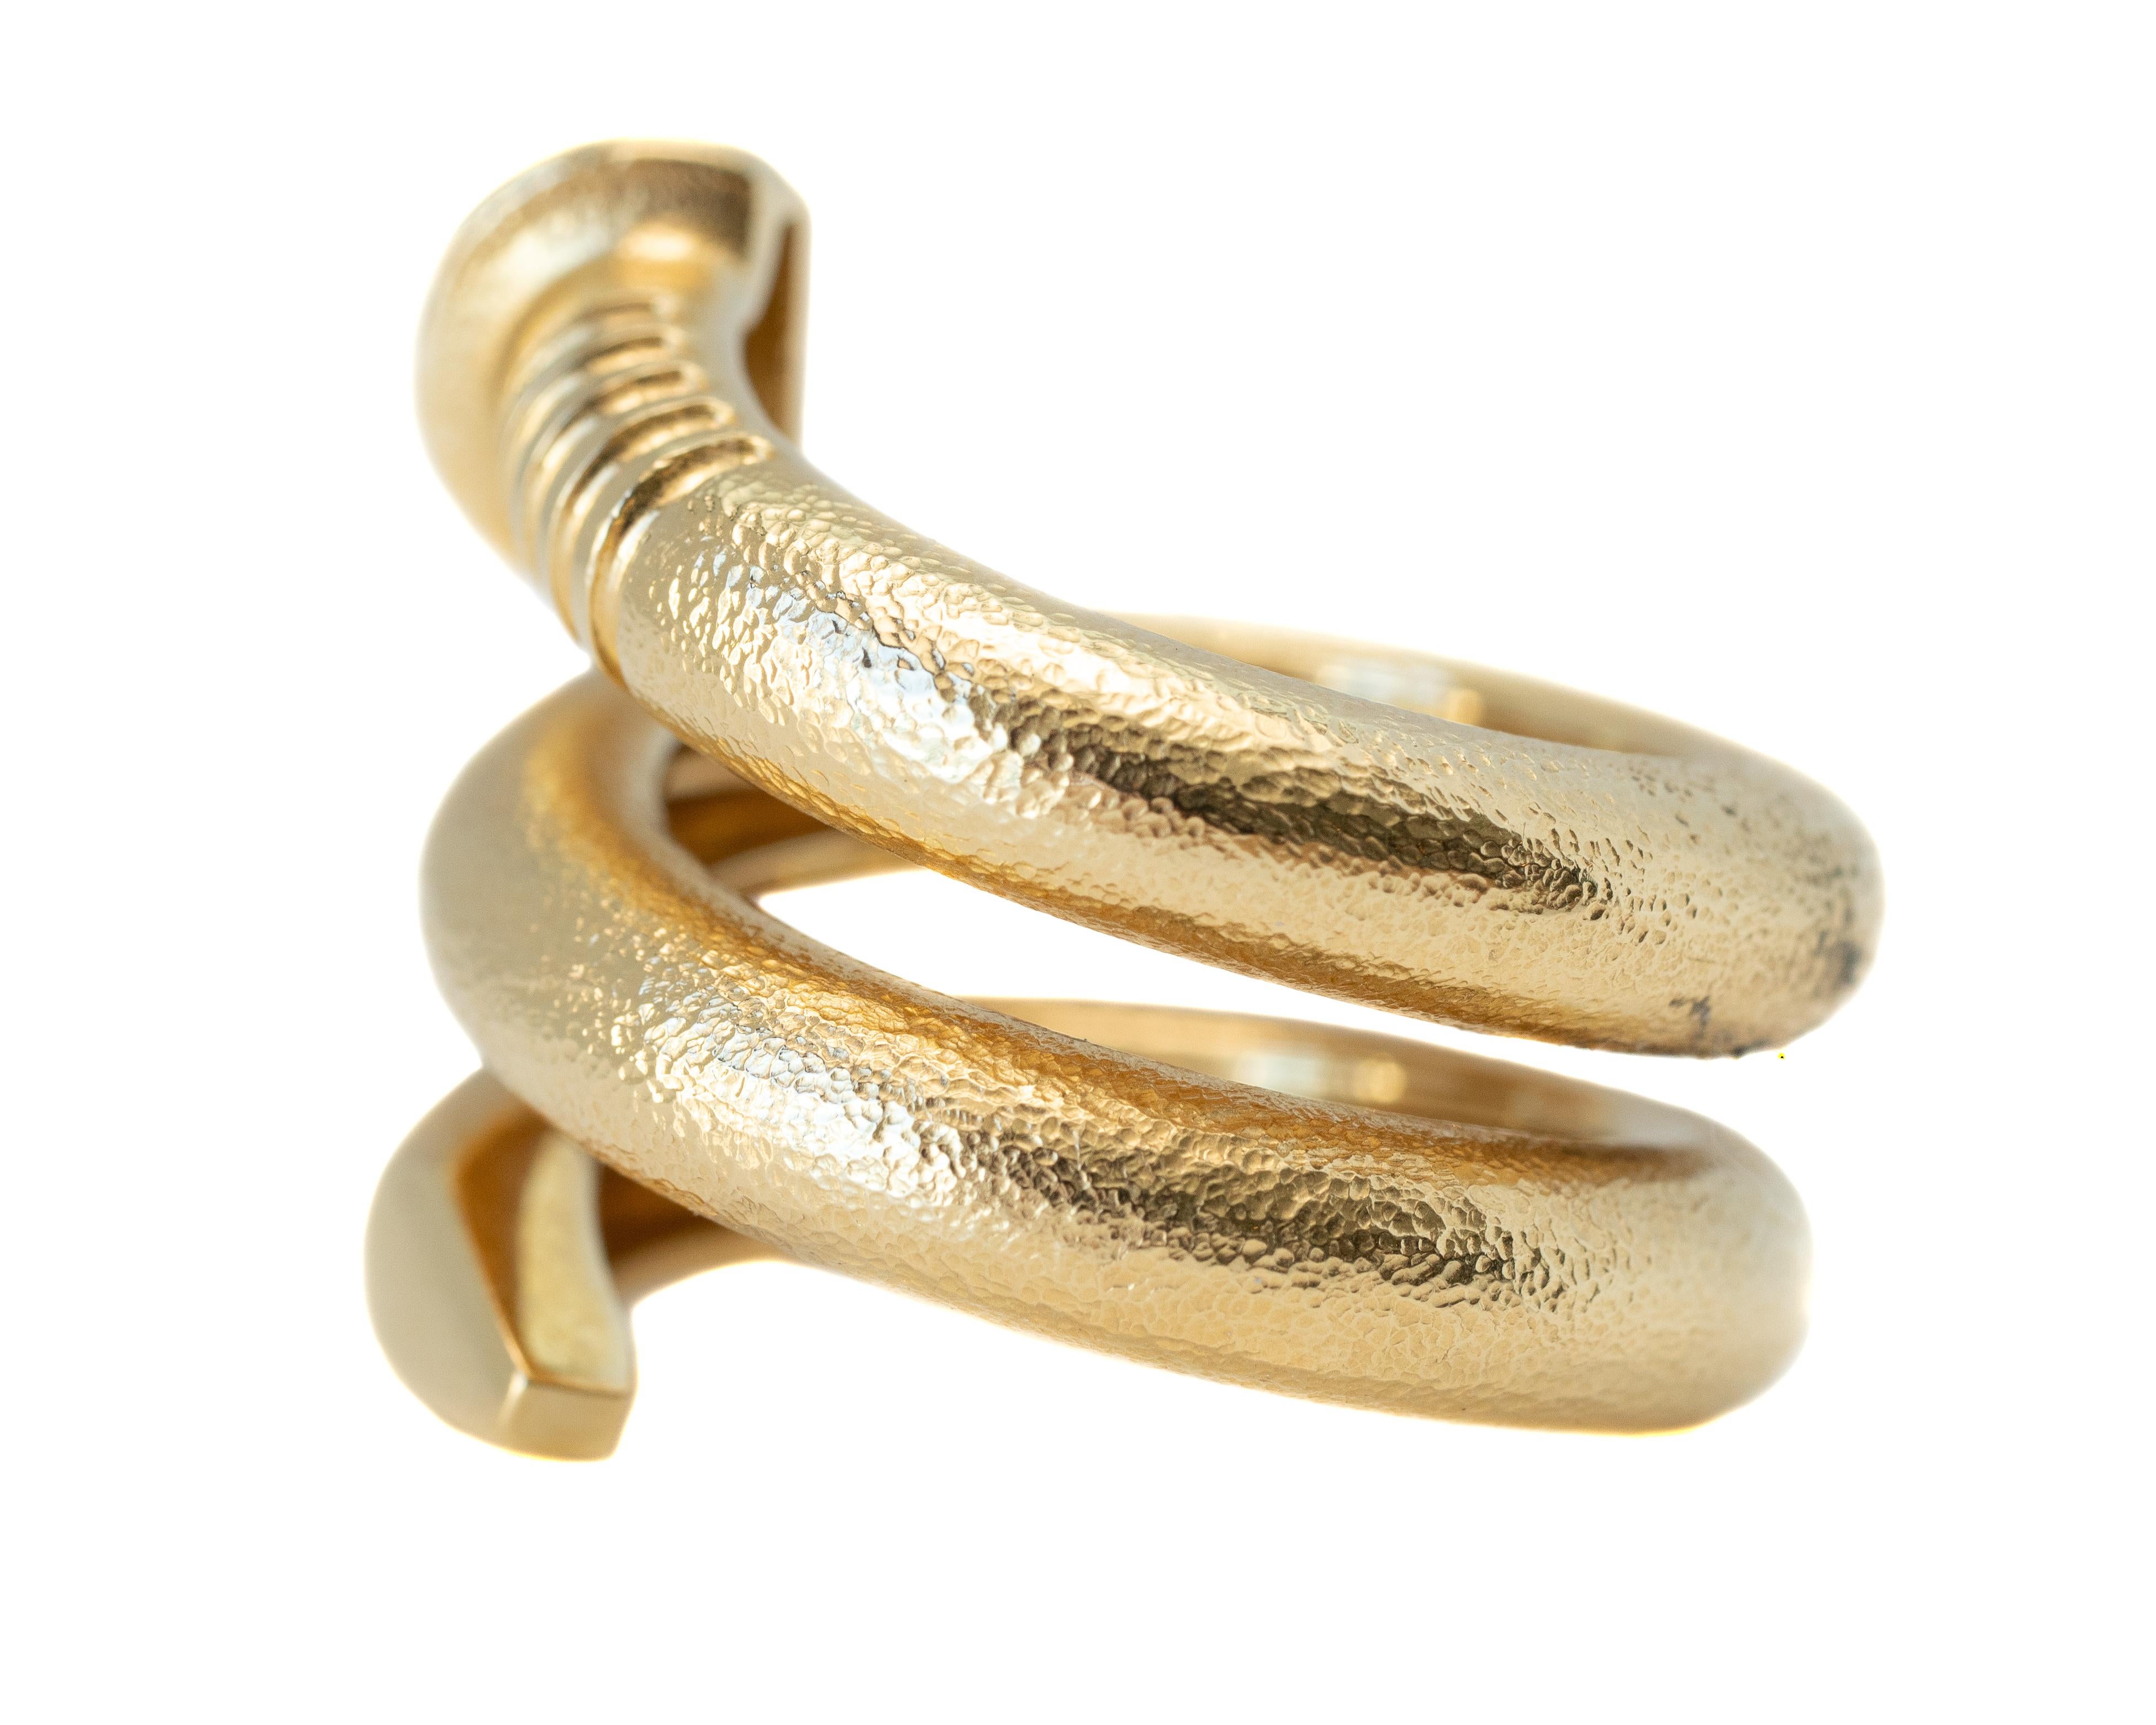 David Webb Tool Chest Hammered Nail Ring - 18 karat Yellow Gold

Features:
From the David Webb Tool Chest Collection
Twisted Nail Design 
Wrap Ring
18 karat Yellow Gold Hammered Finish
Finger to top of ring measures 4 - 7 millimeters
Ring Width